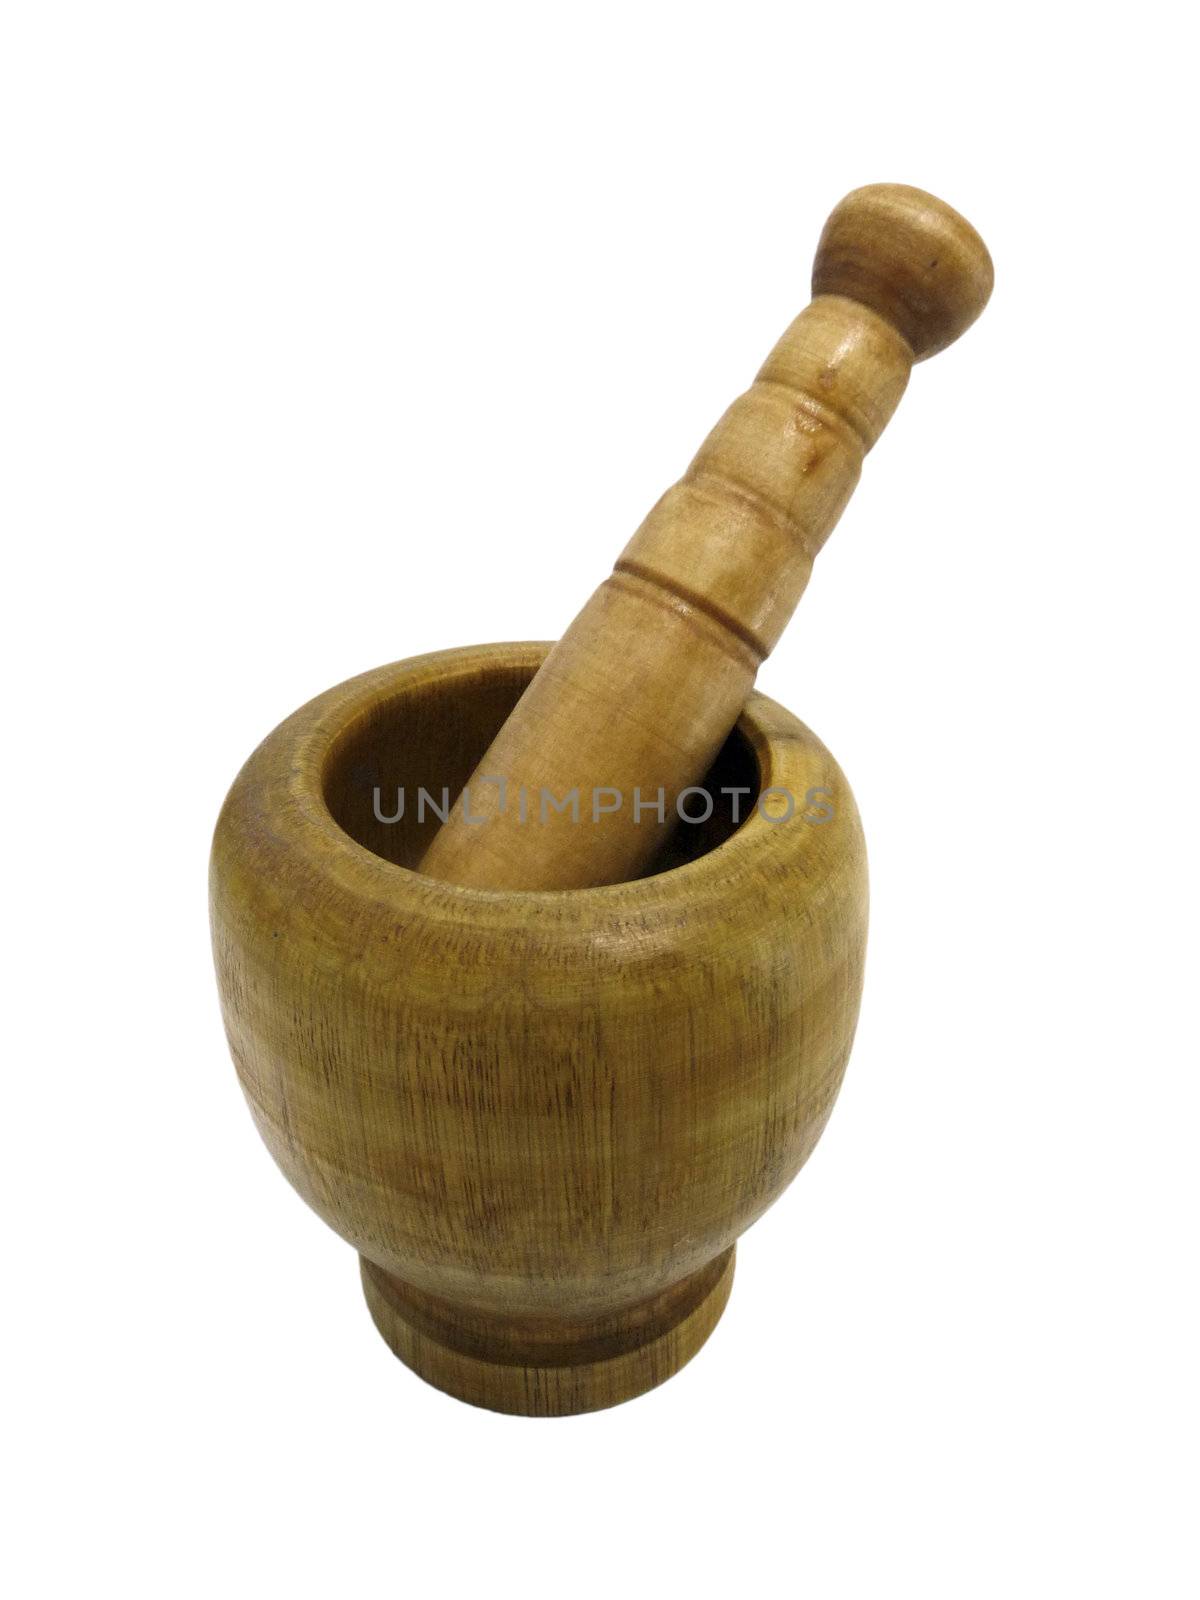 A mortar and pestle on white background